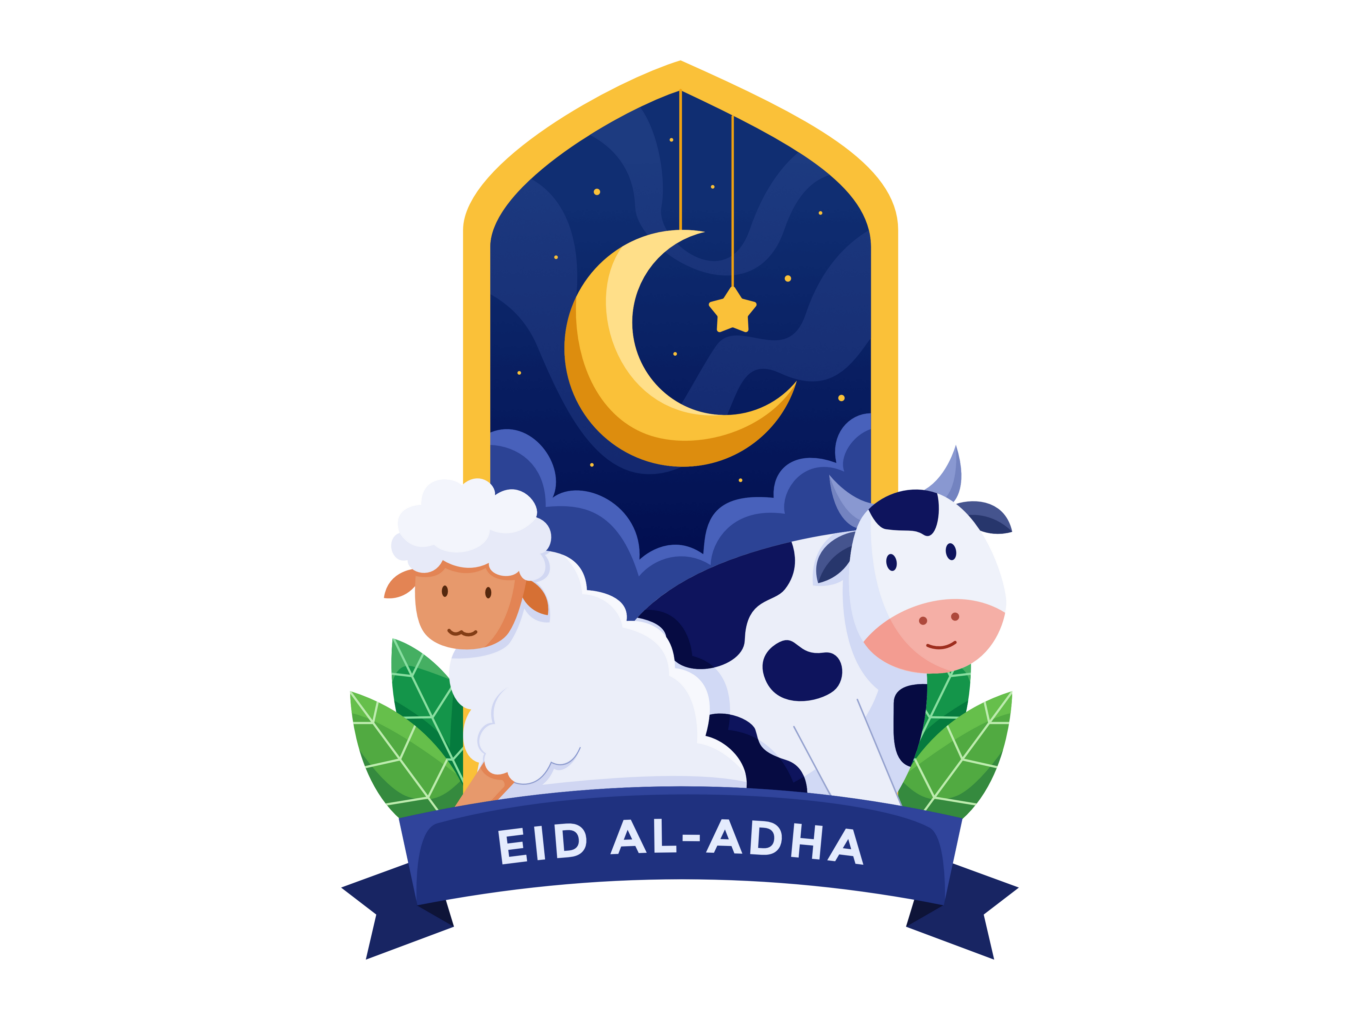 Illustration of a cow and sheep sitting in front of a window showing the night sky. At the front of the image there is a dark blue banner that says "Eid Al-Adha". 